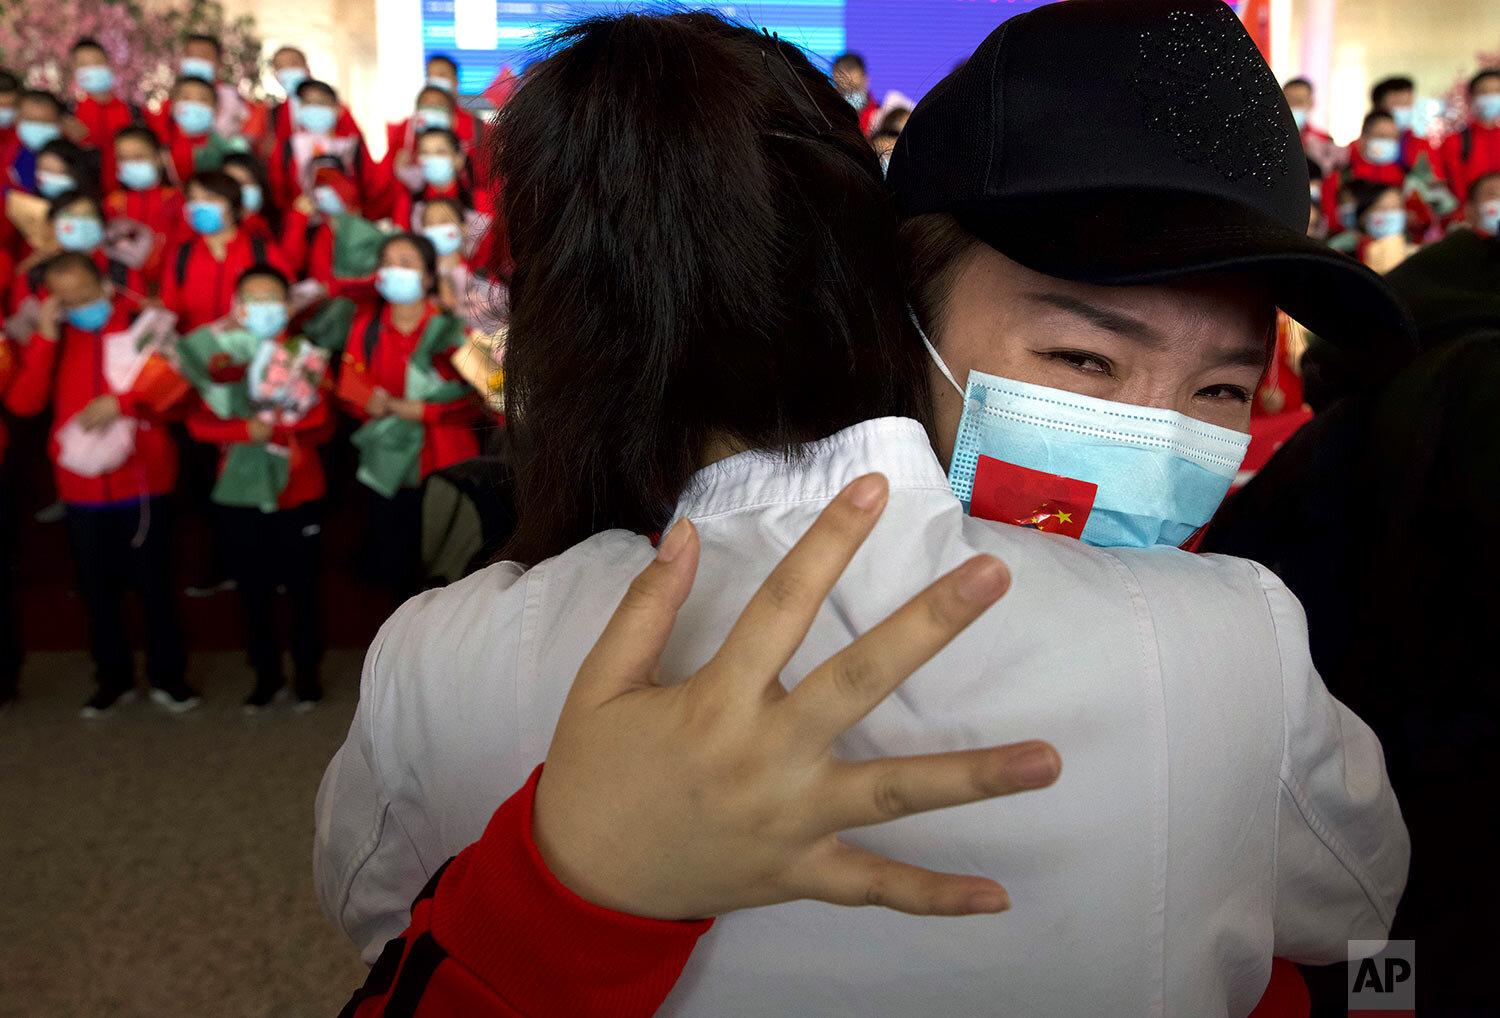  A medical worker from China's Jilin Province reacts as she prepares to return home at Wuhan Tianhe International Airport in Wuhan in central China's Hubei Province, April 8, 2020. (AP Photo/Ng Han Guan) 